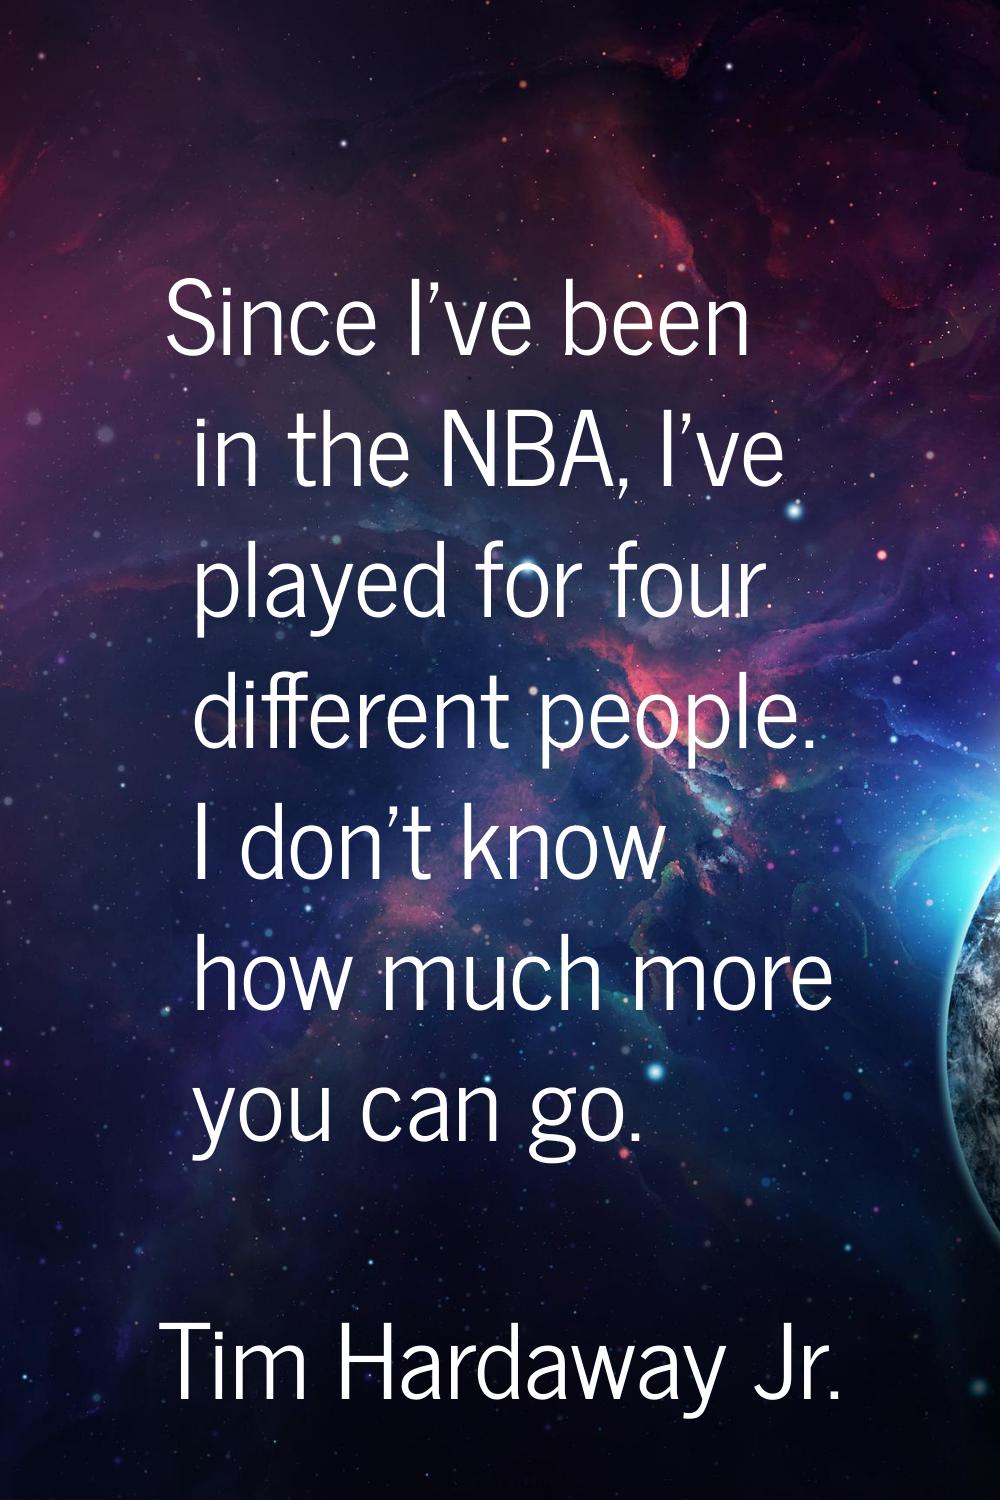 Since I've been in the NBA, I've played for four different people. I don't know how much more you c